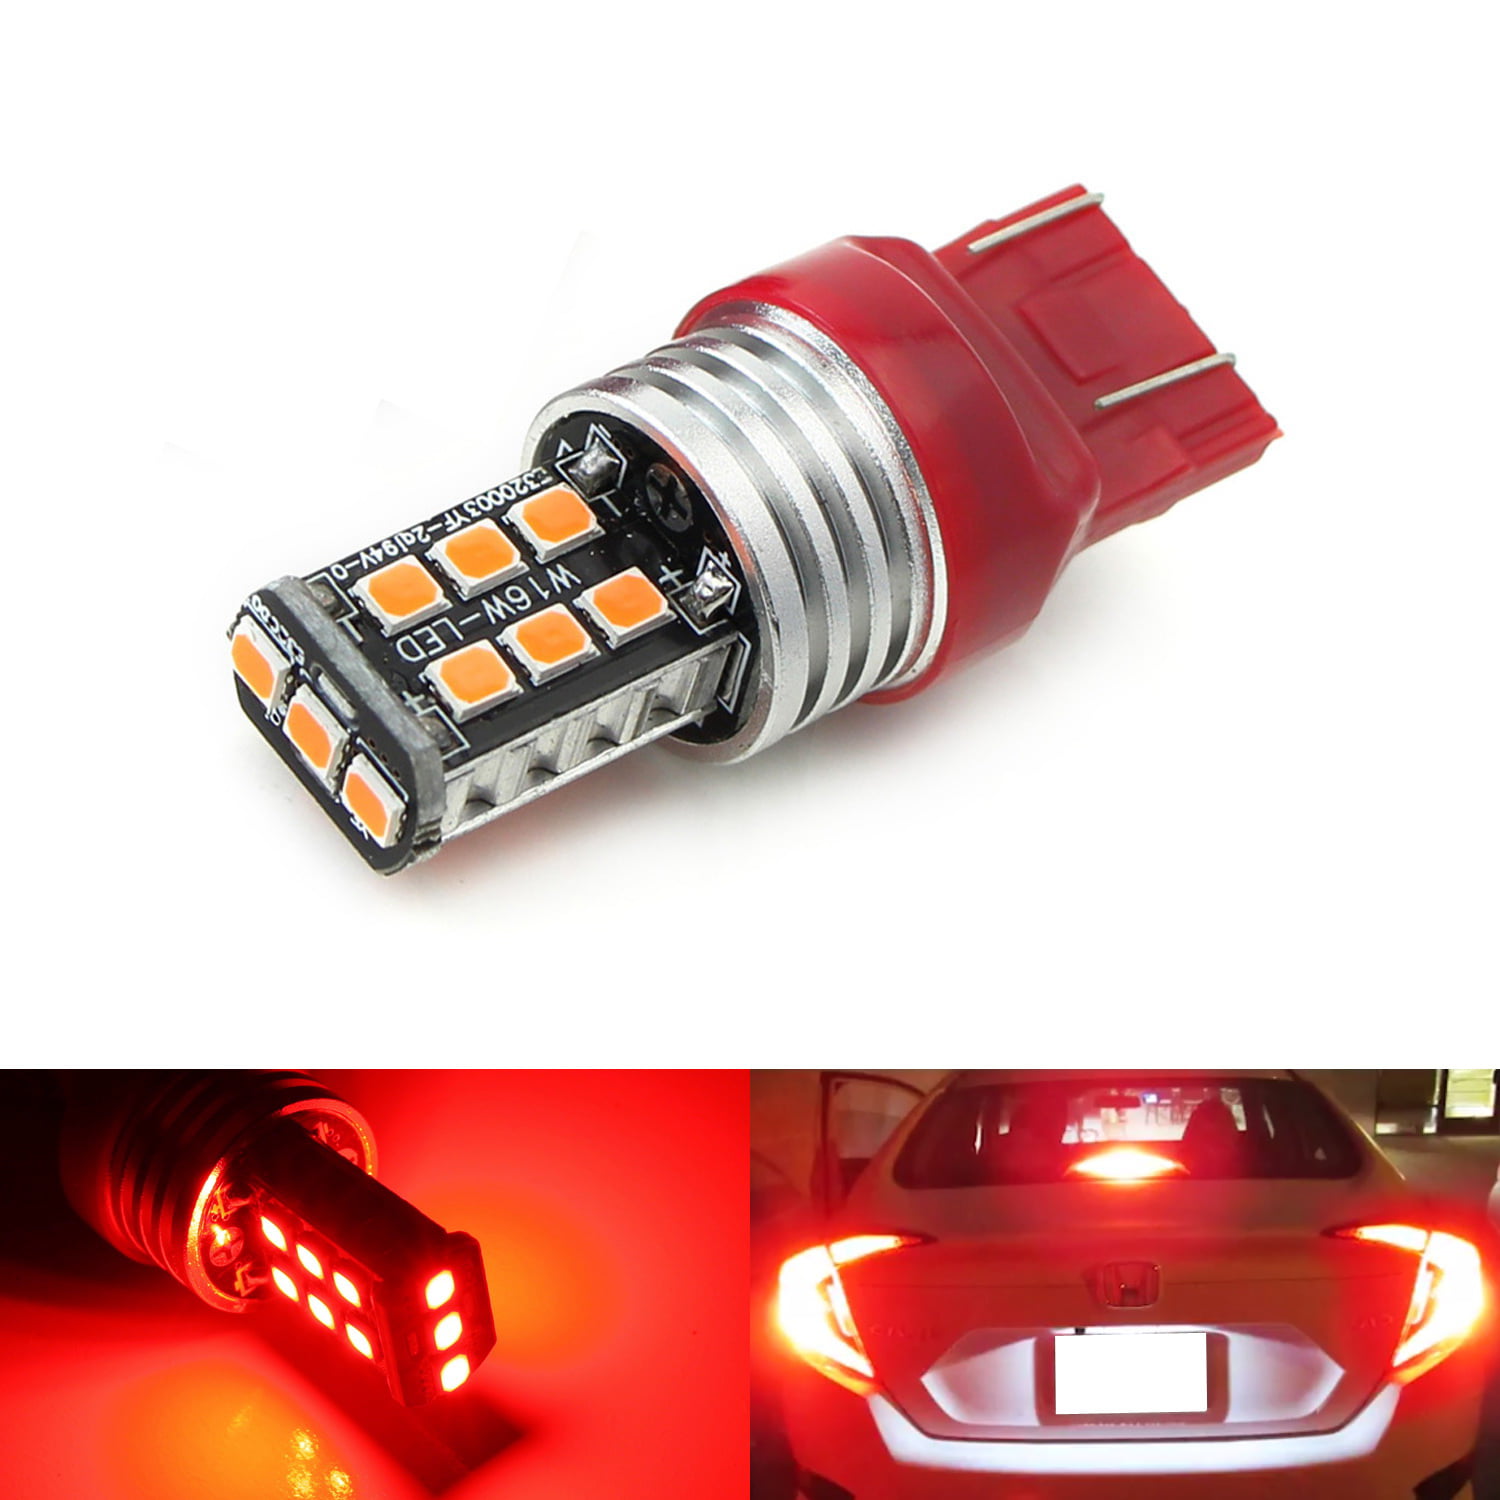 1 iJDMTOY Strobe/Flashing Feature Red 15-SMD LED Replacement Bulb For 2012-up Honda Civic Sedan Third Brake Light.